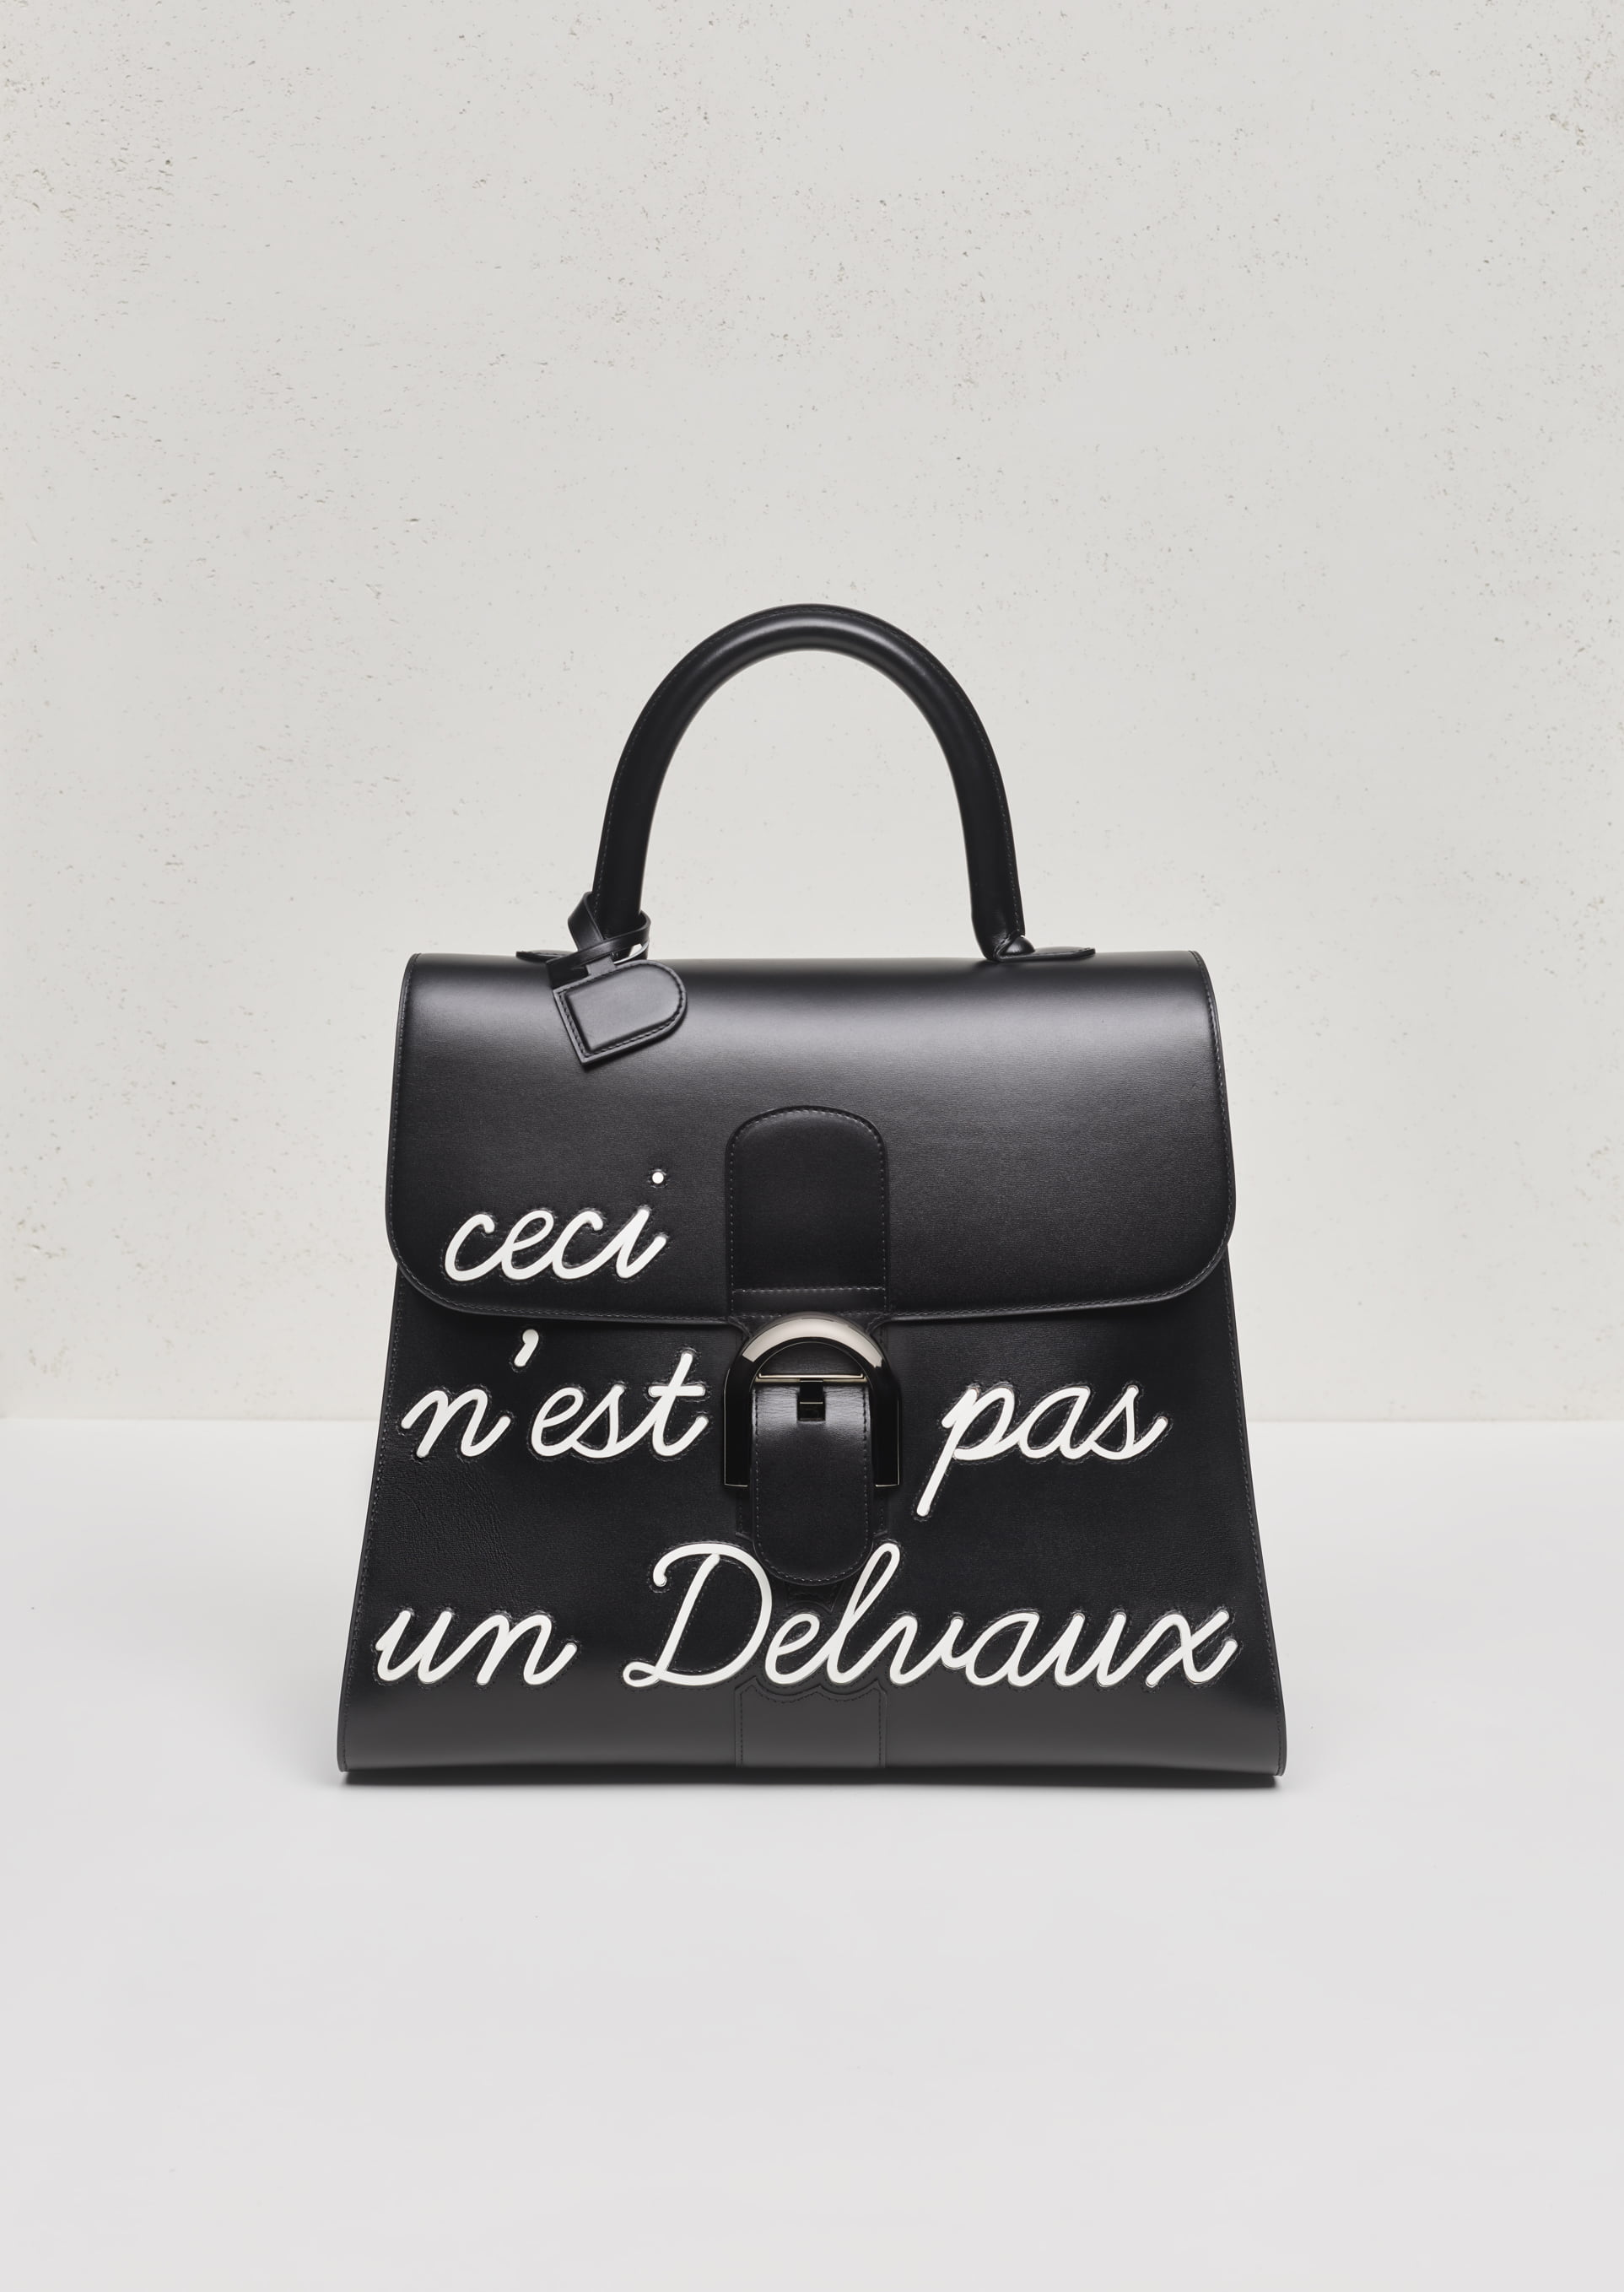 Delvaux: Delvaux: Miniatures Around The World - Luxferity